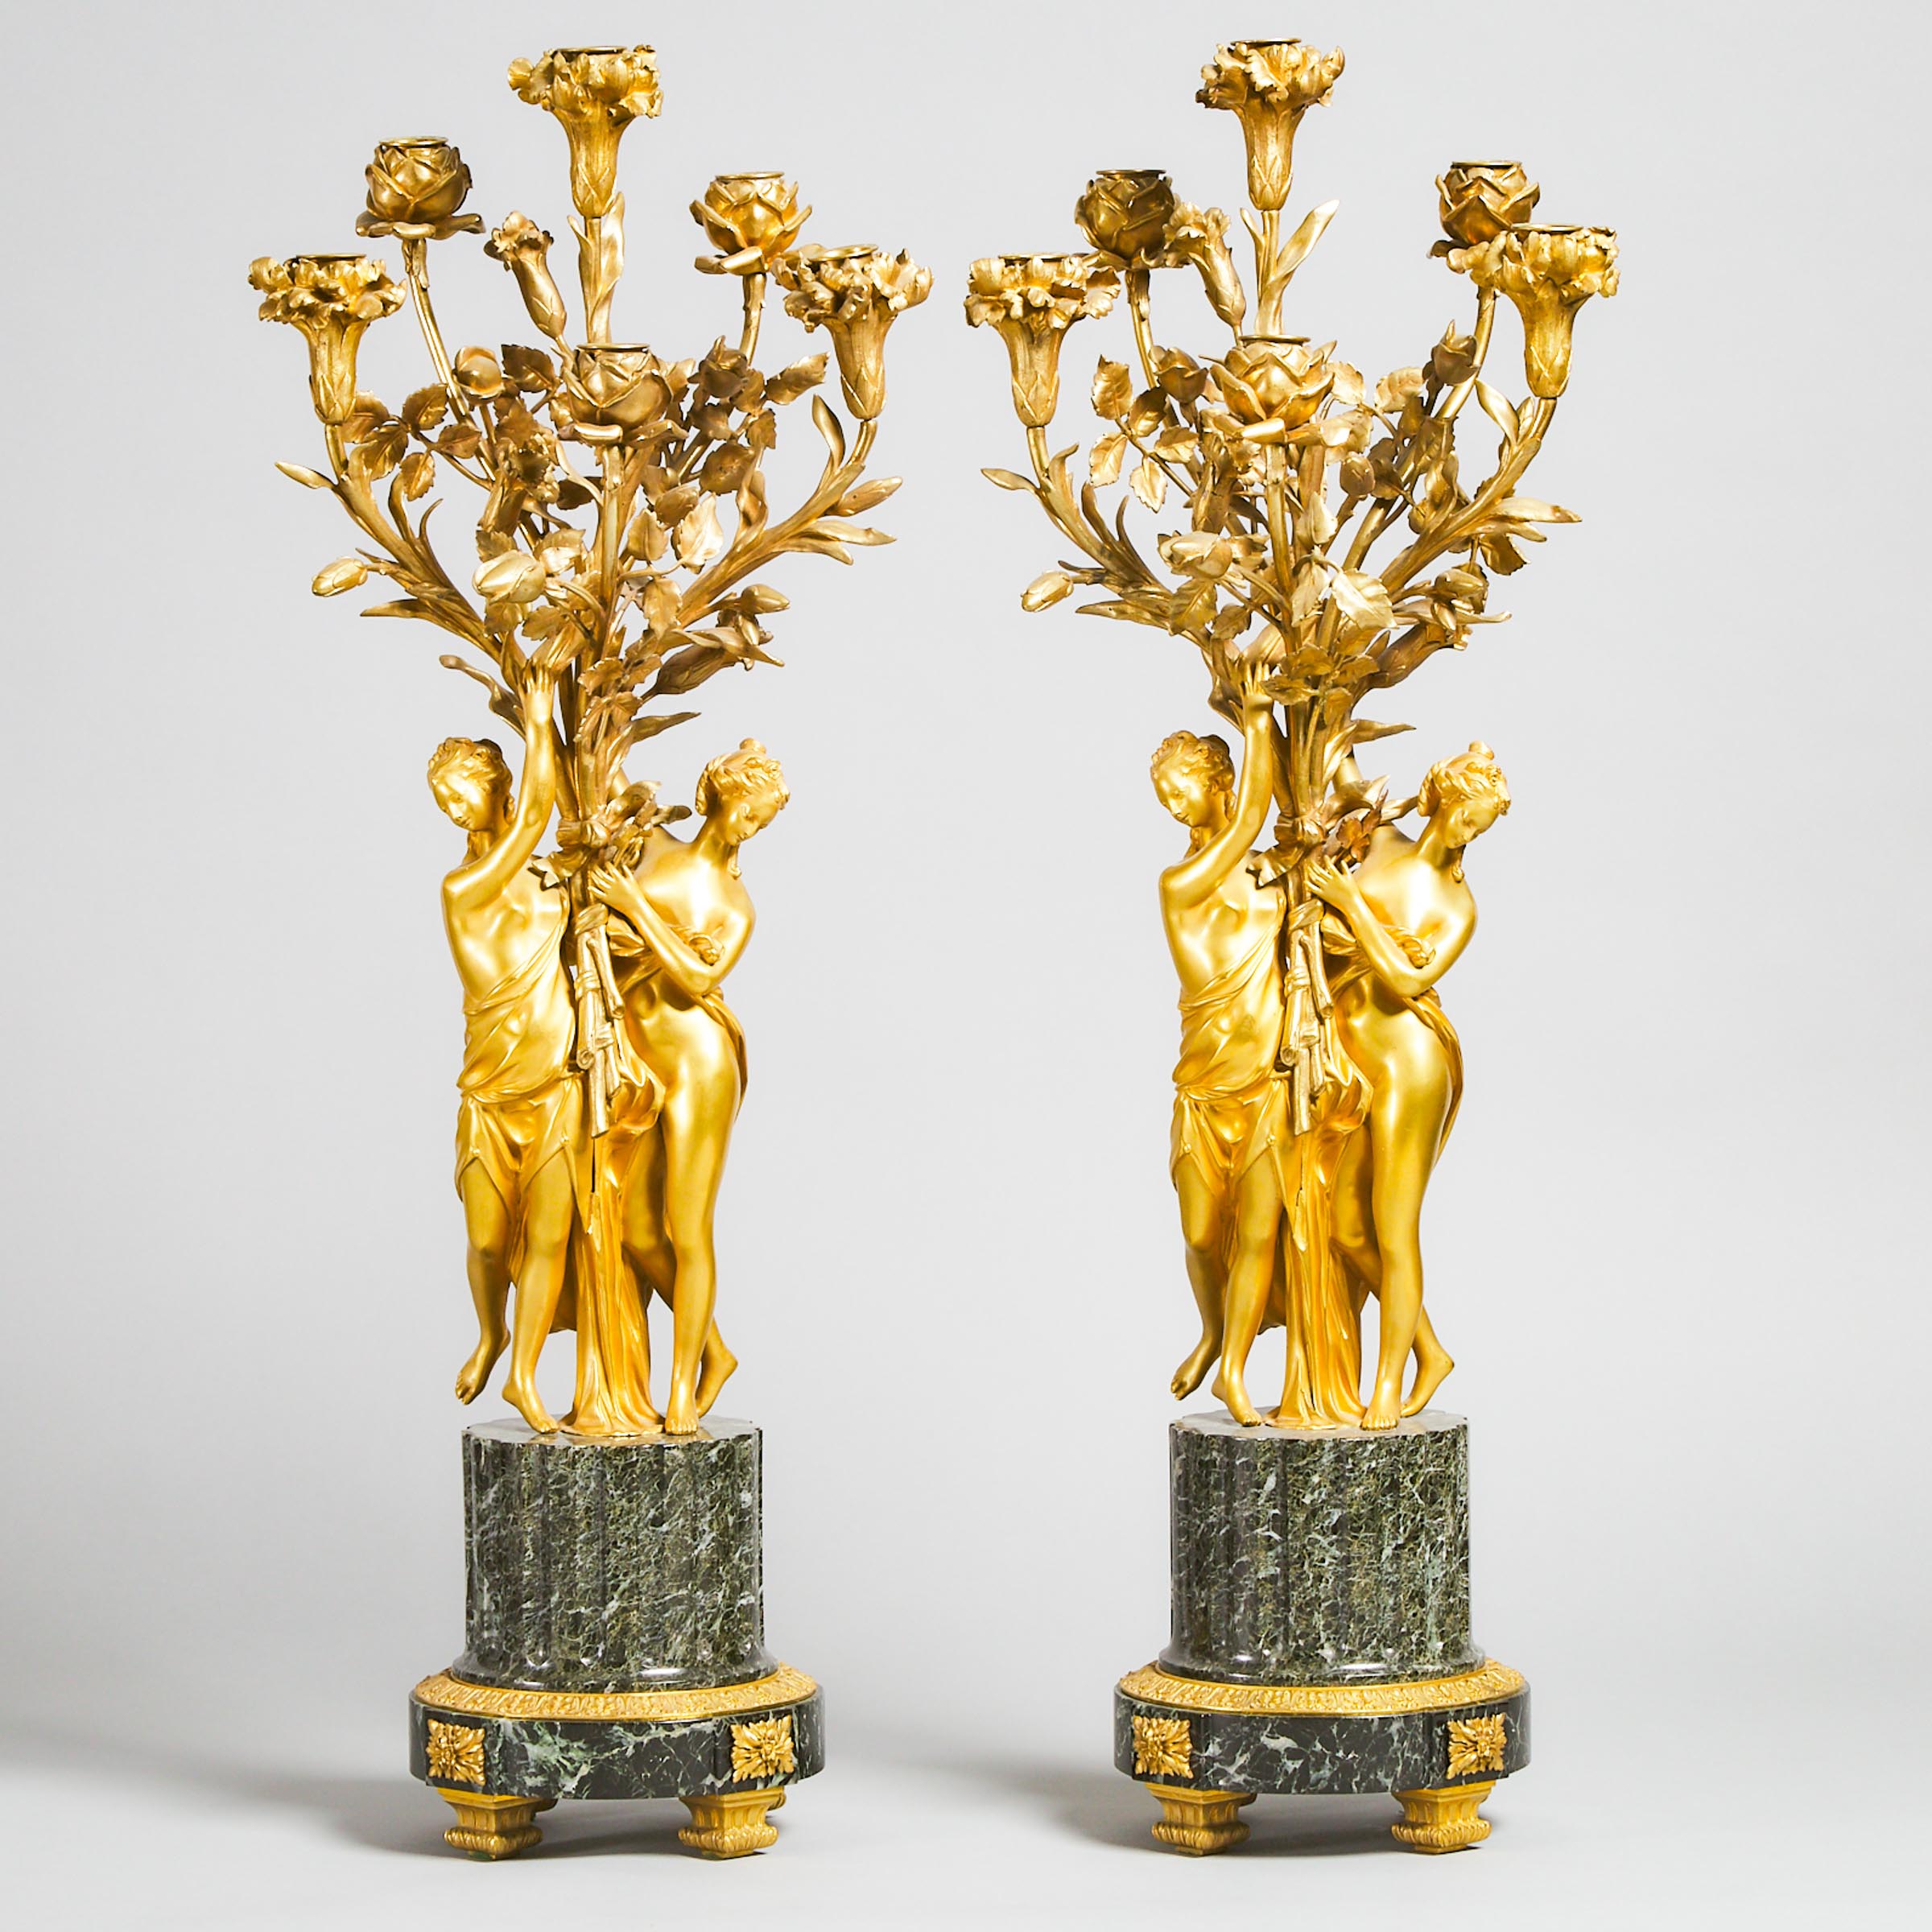 Pair of French Gilt Bronze and Marble Figural Candelabras, 20th century